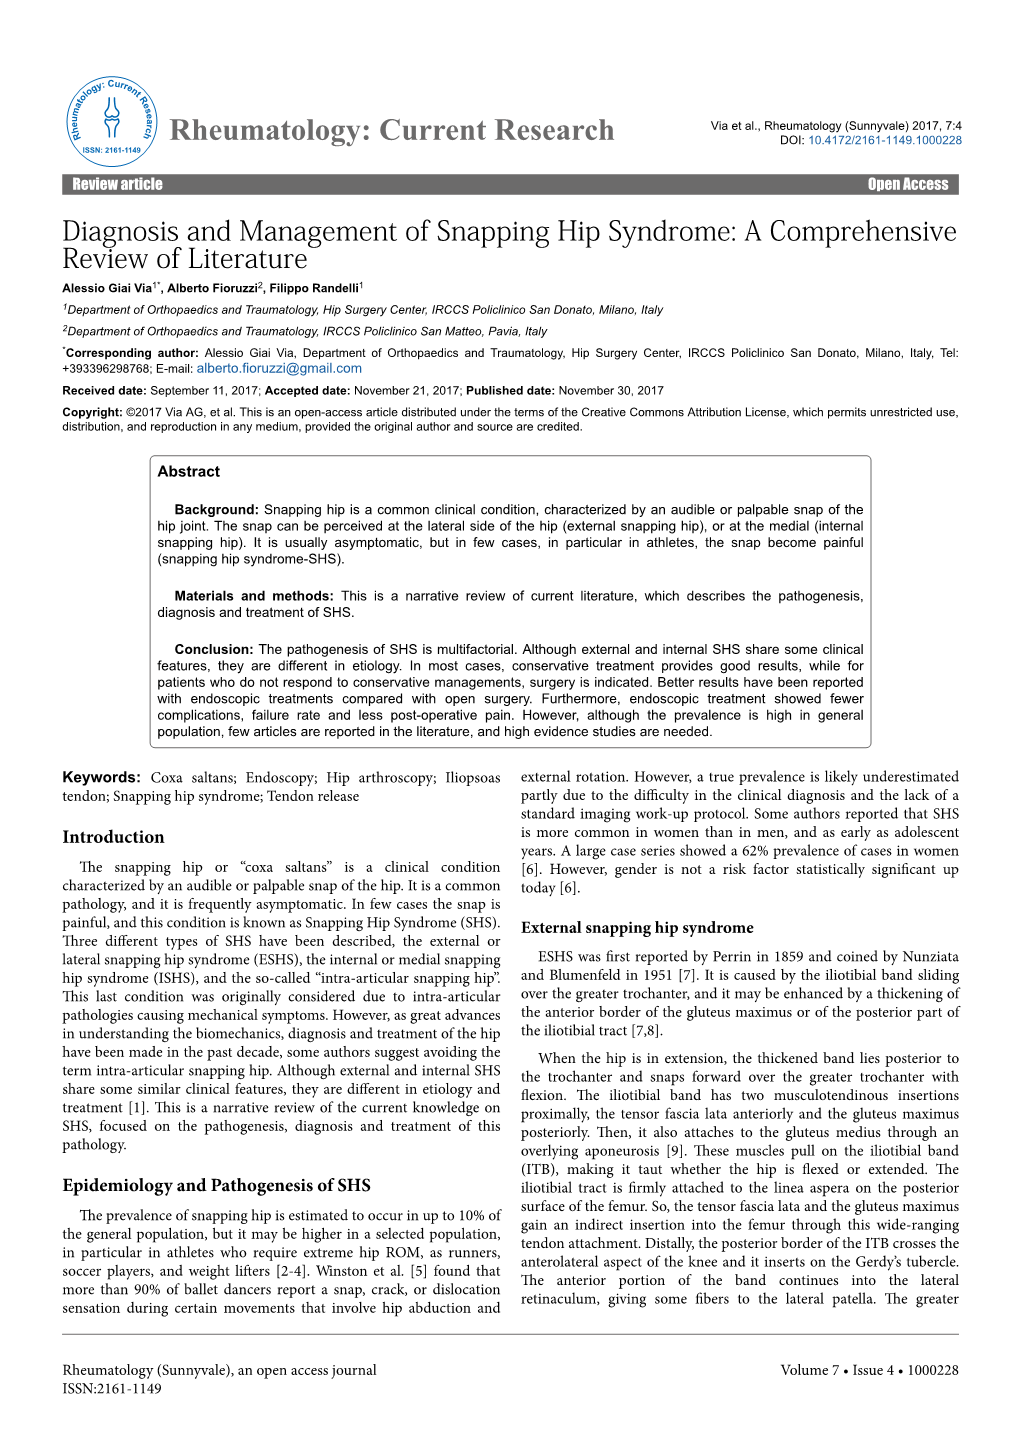 Diagnosis and Management of Snapping Hip Syndrome